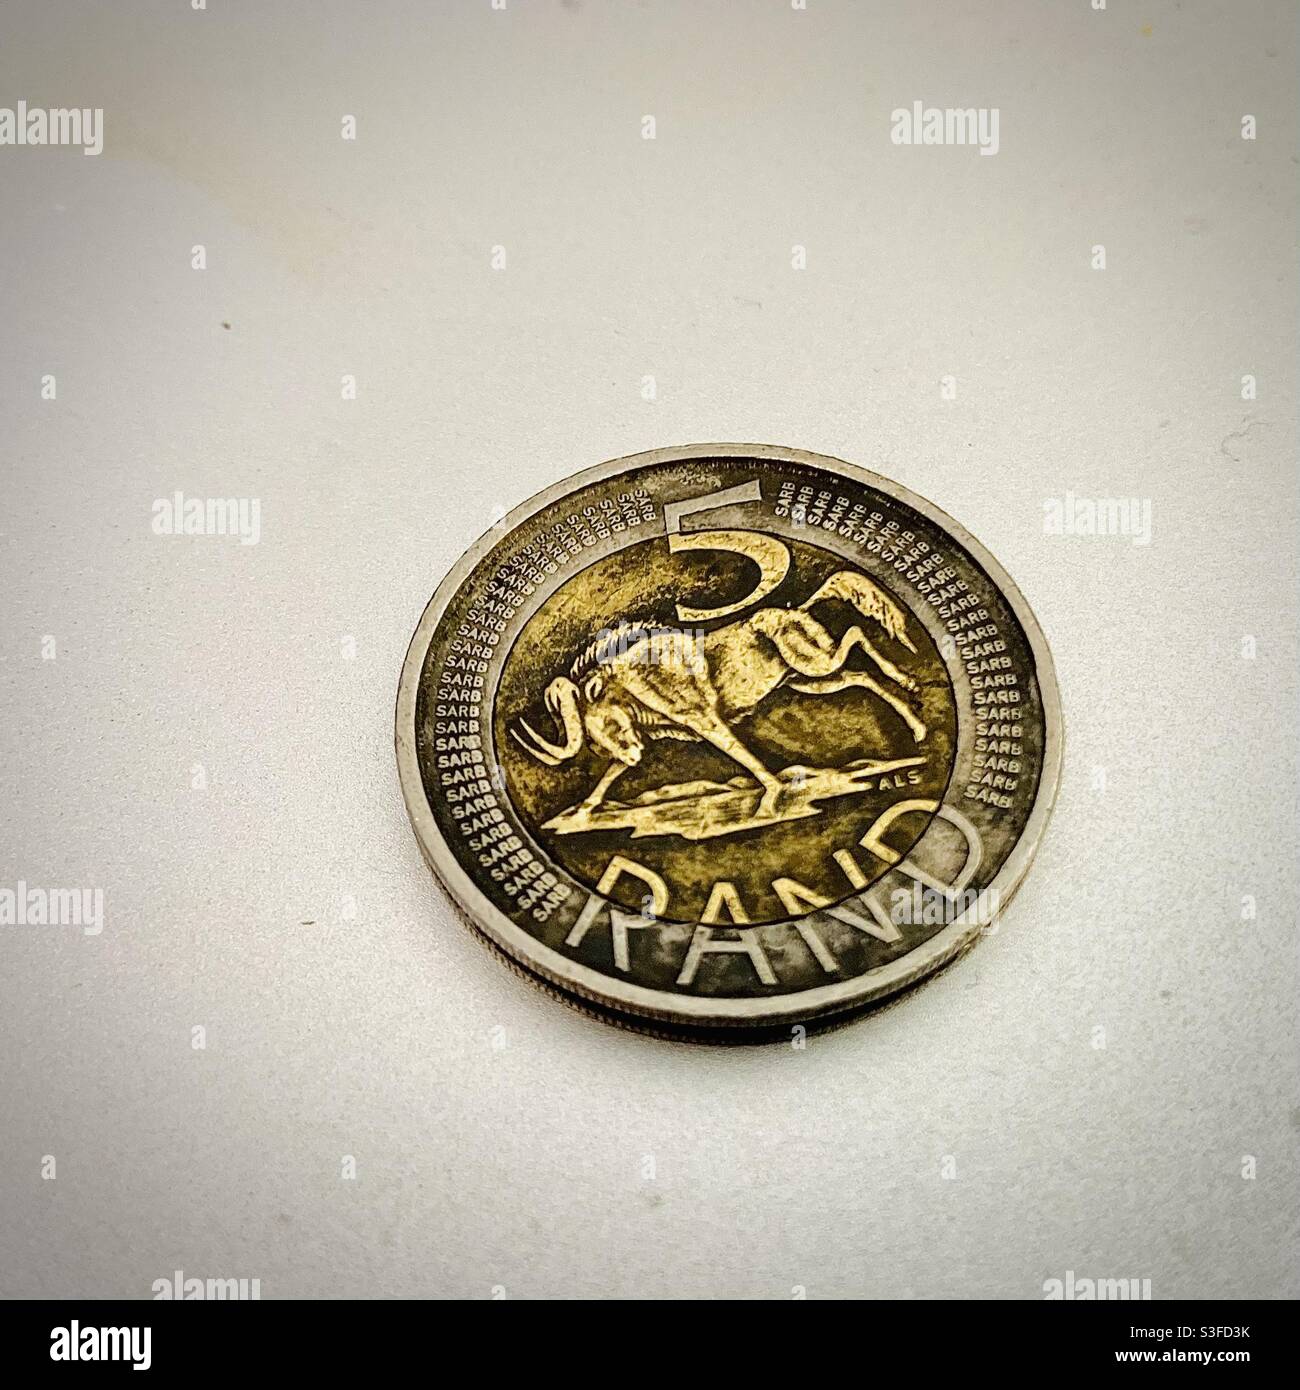 Dirty money. South African five Rand coin. R5. Bimetal coin. Stock Photo